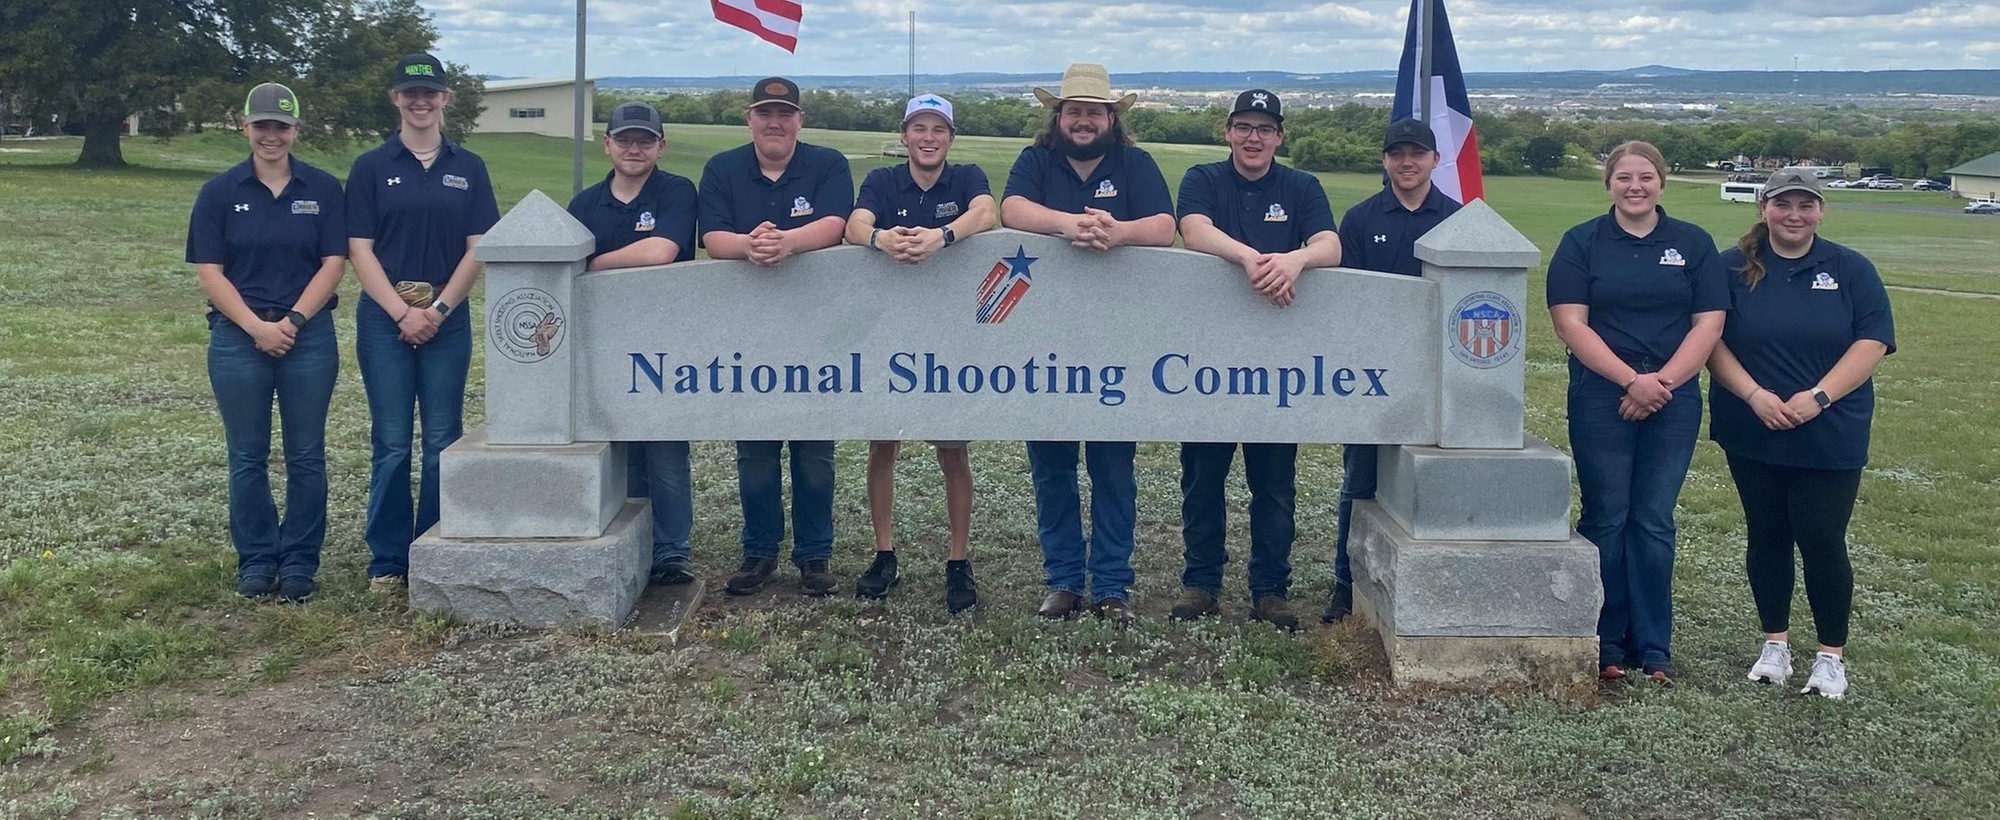 Lakers Finish in 8th place in Both 16 Yard Singles and Doubles at ACUI/SCTP Nationals